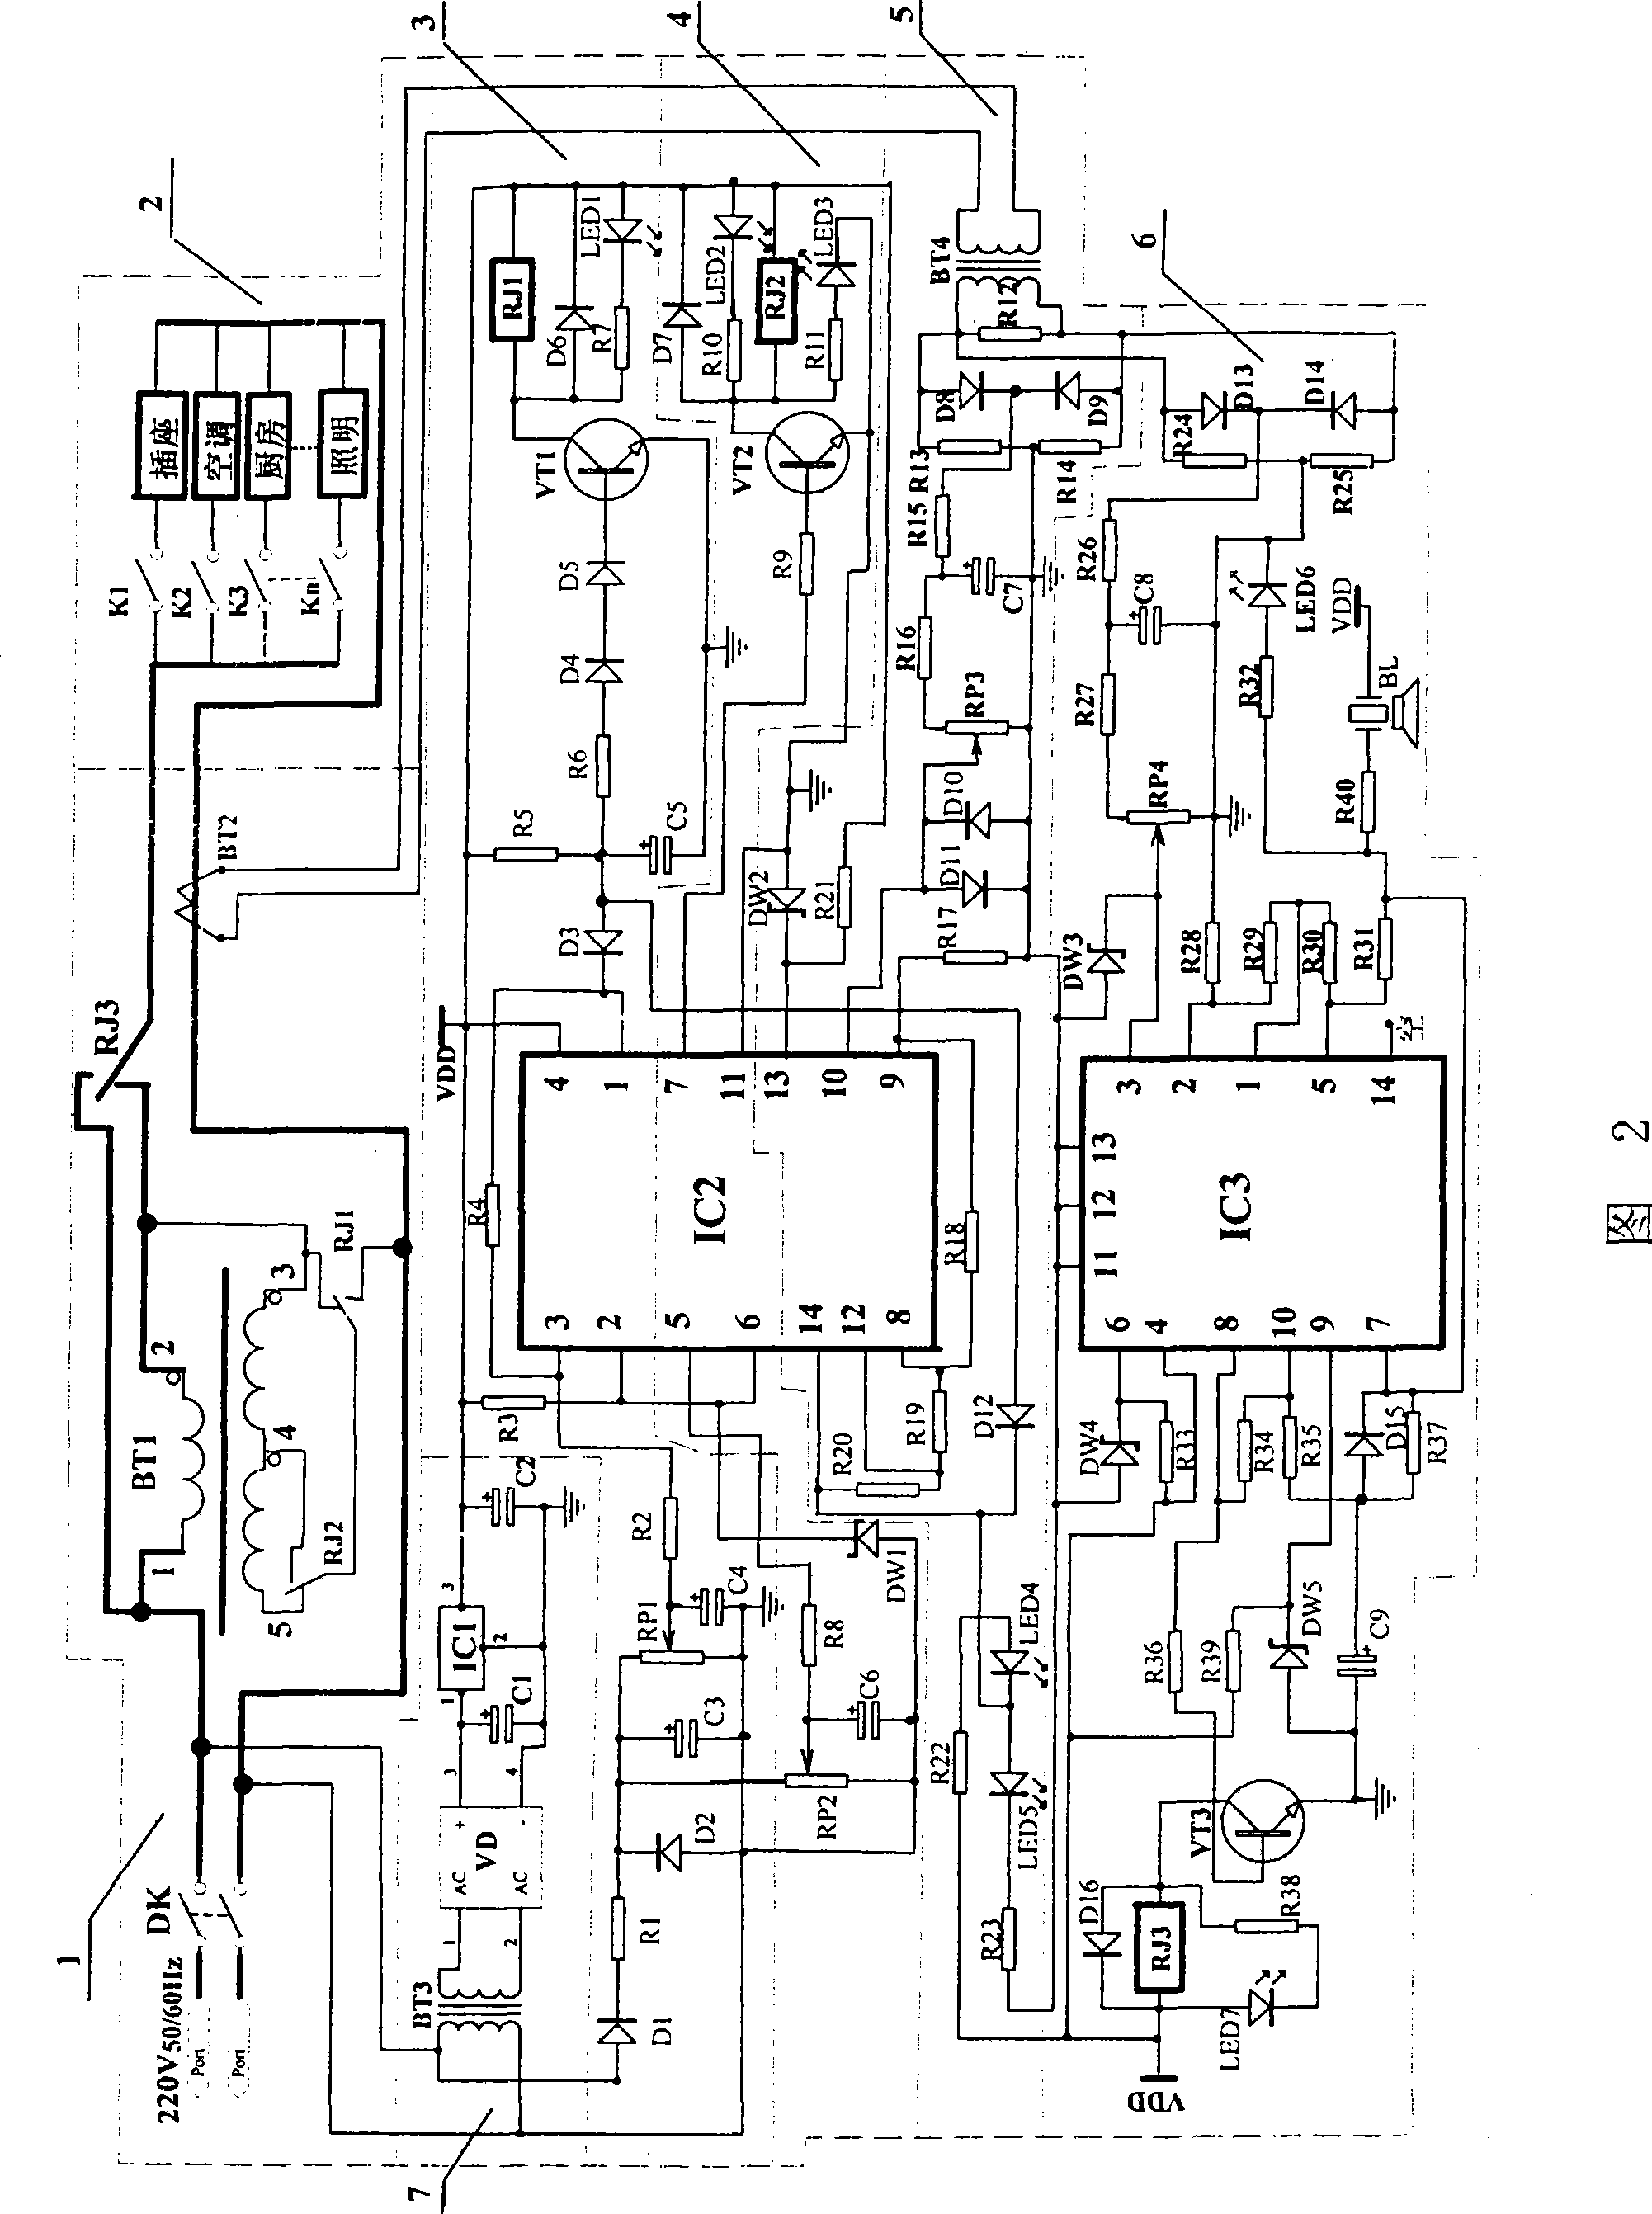 Intelligent building electricity saving and distributing apparatus